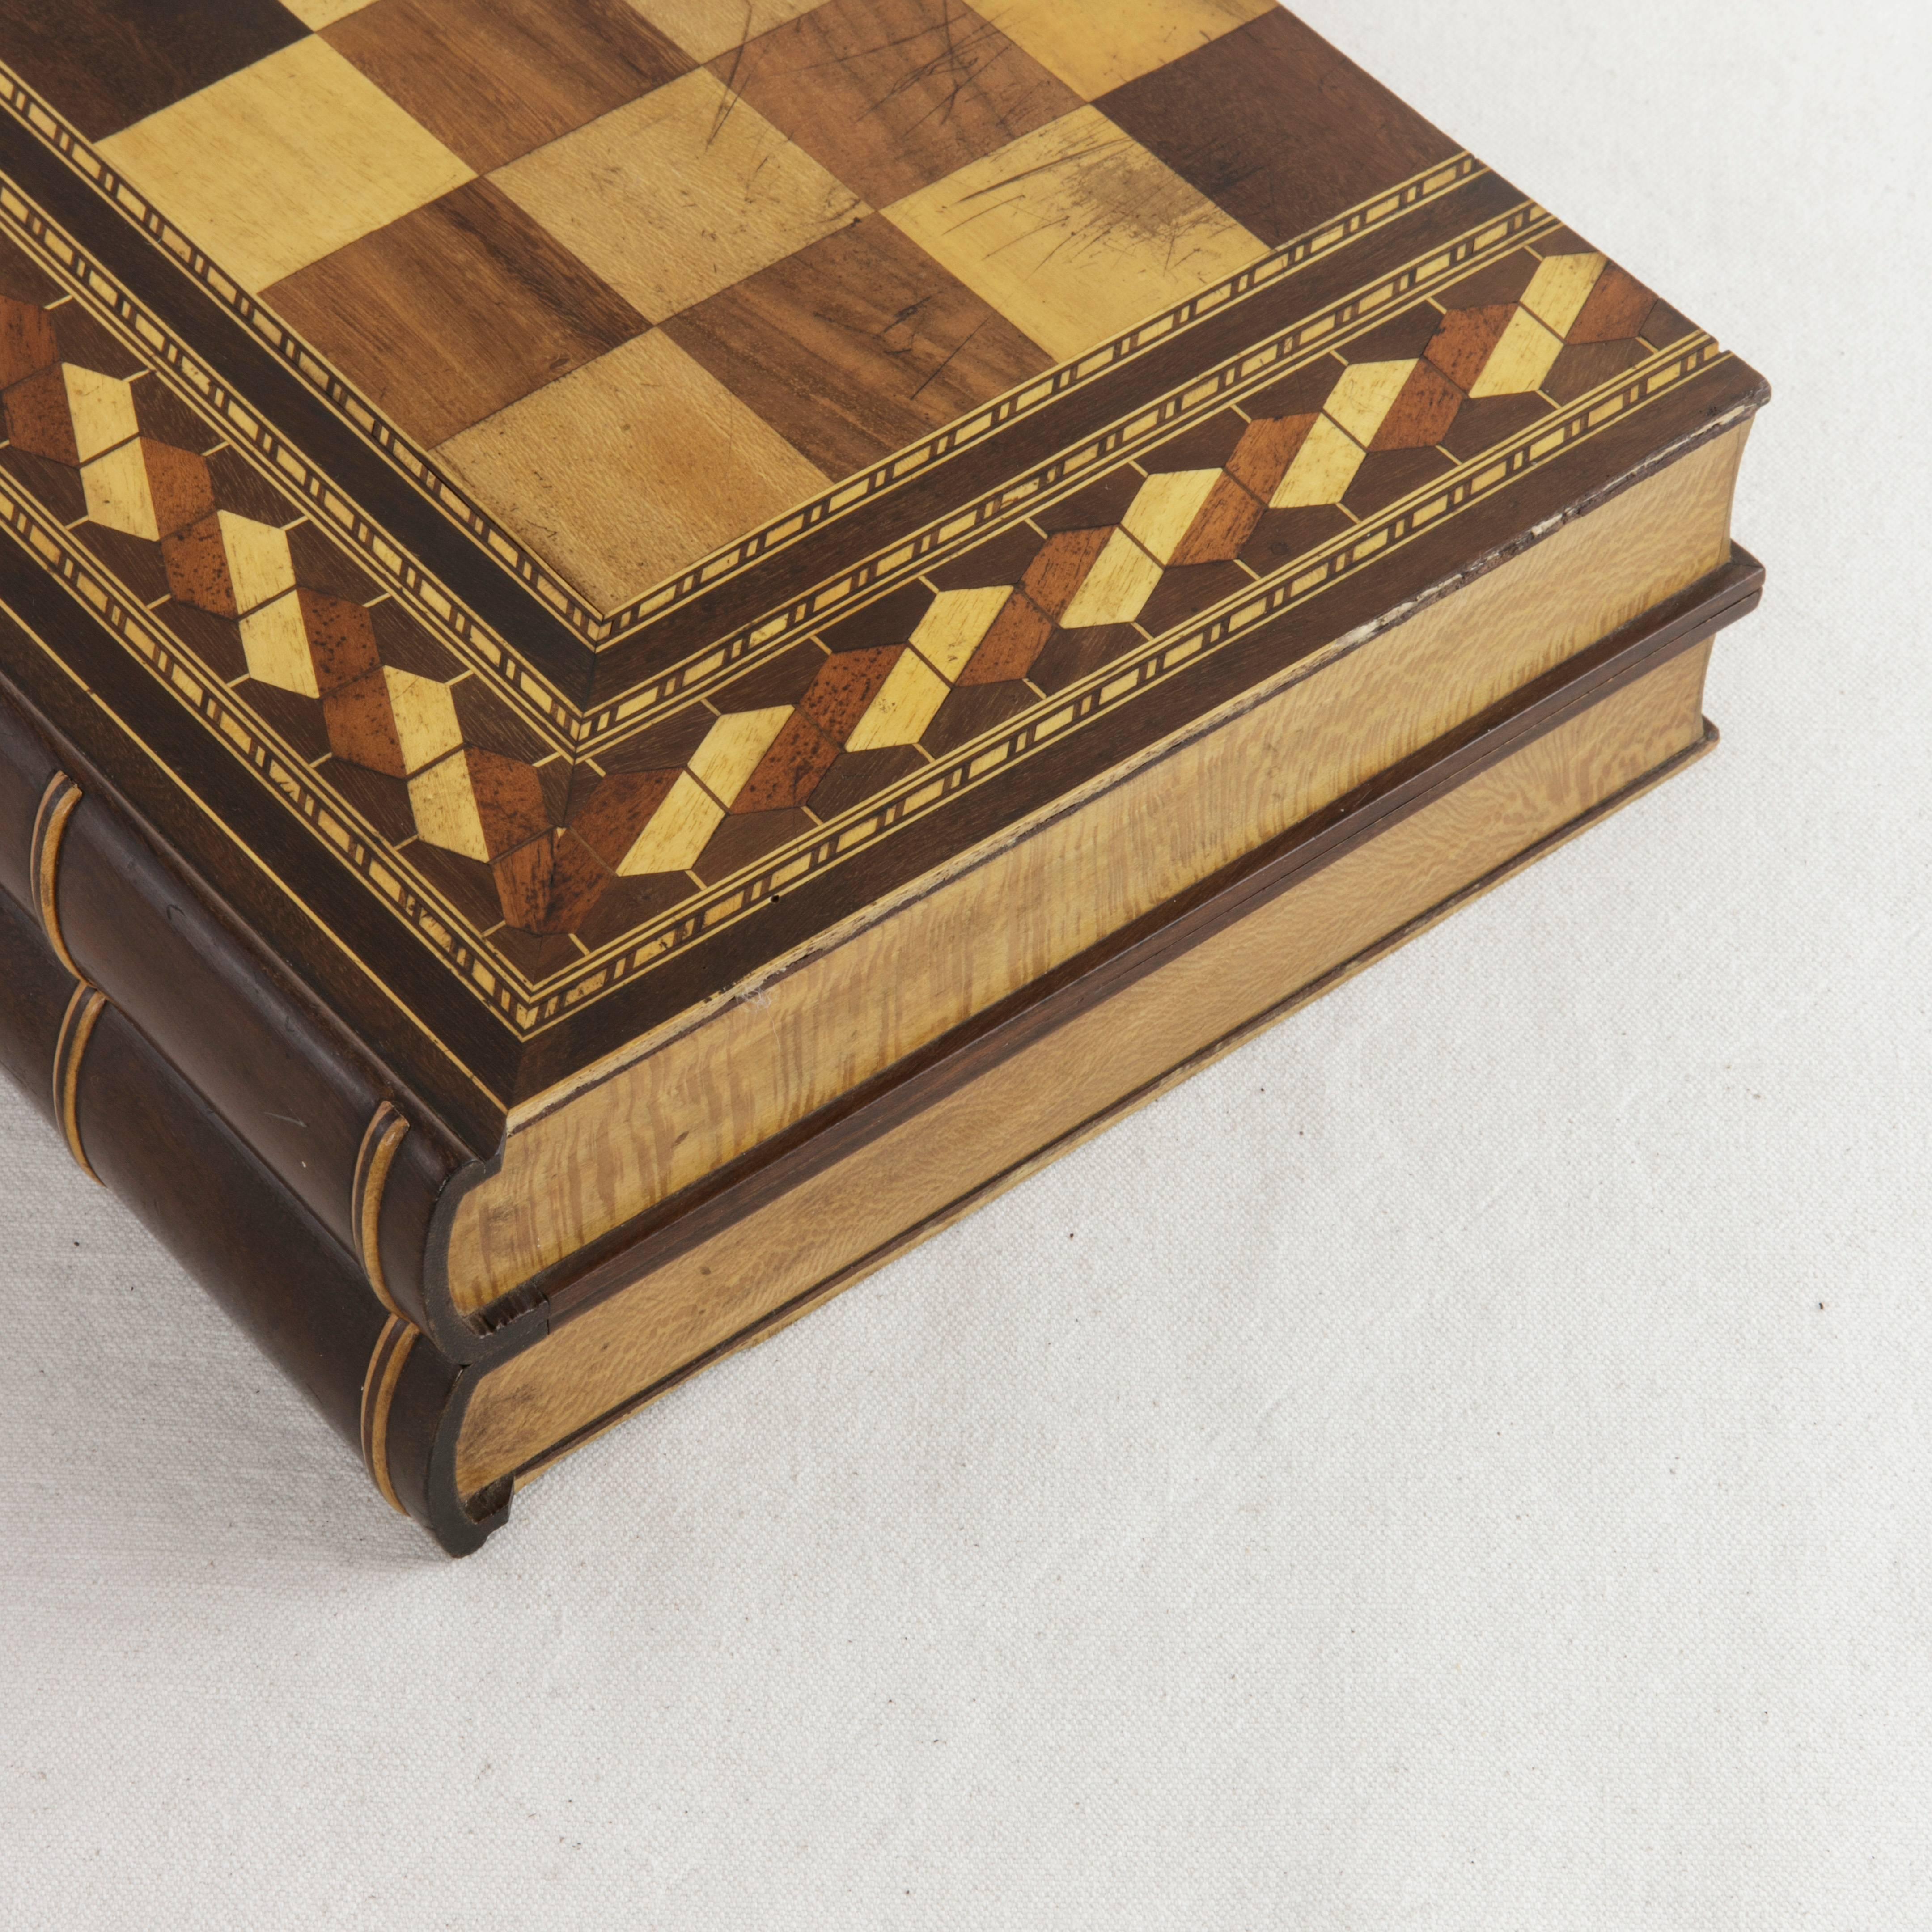 Hinged Marquetry Game Box for Chess, Checkers, Backgammon, Stacked Books Form 4